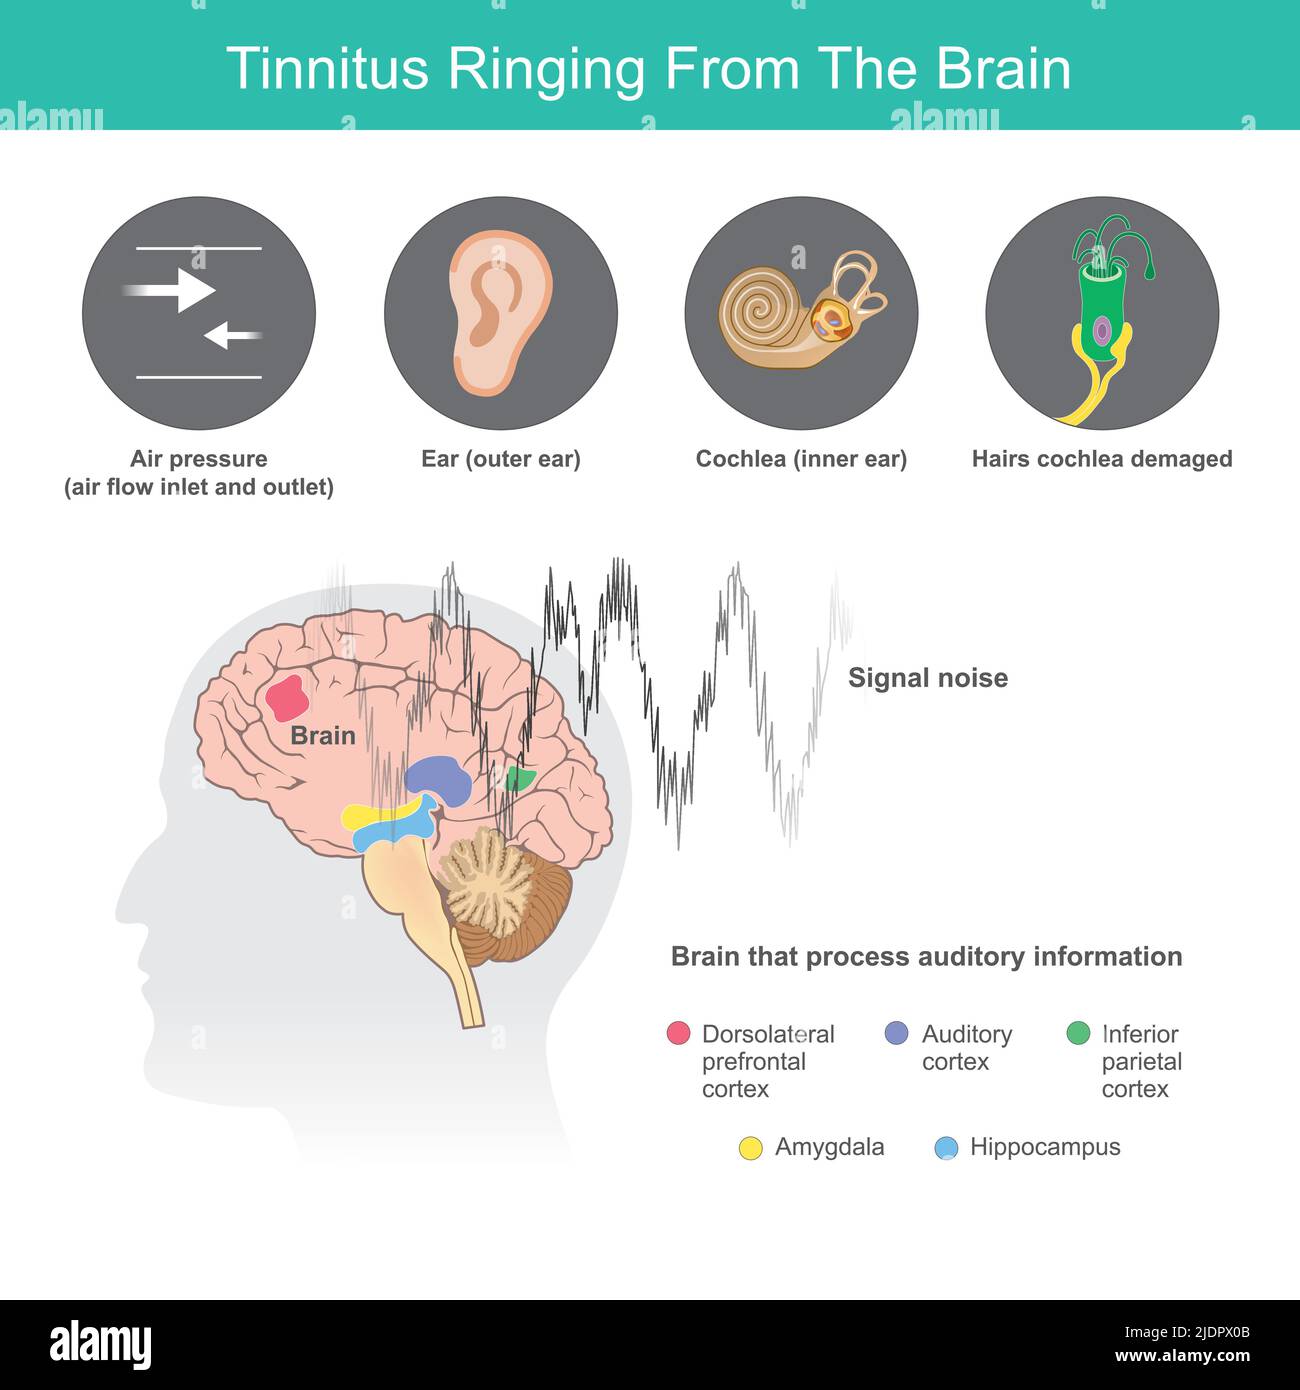 Tinnitus Ringing From The Brain, Is the term for a buzzing noise in your ears from symptoms abnormal in ears or the brain. Stock Vector